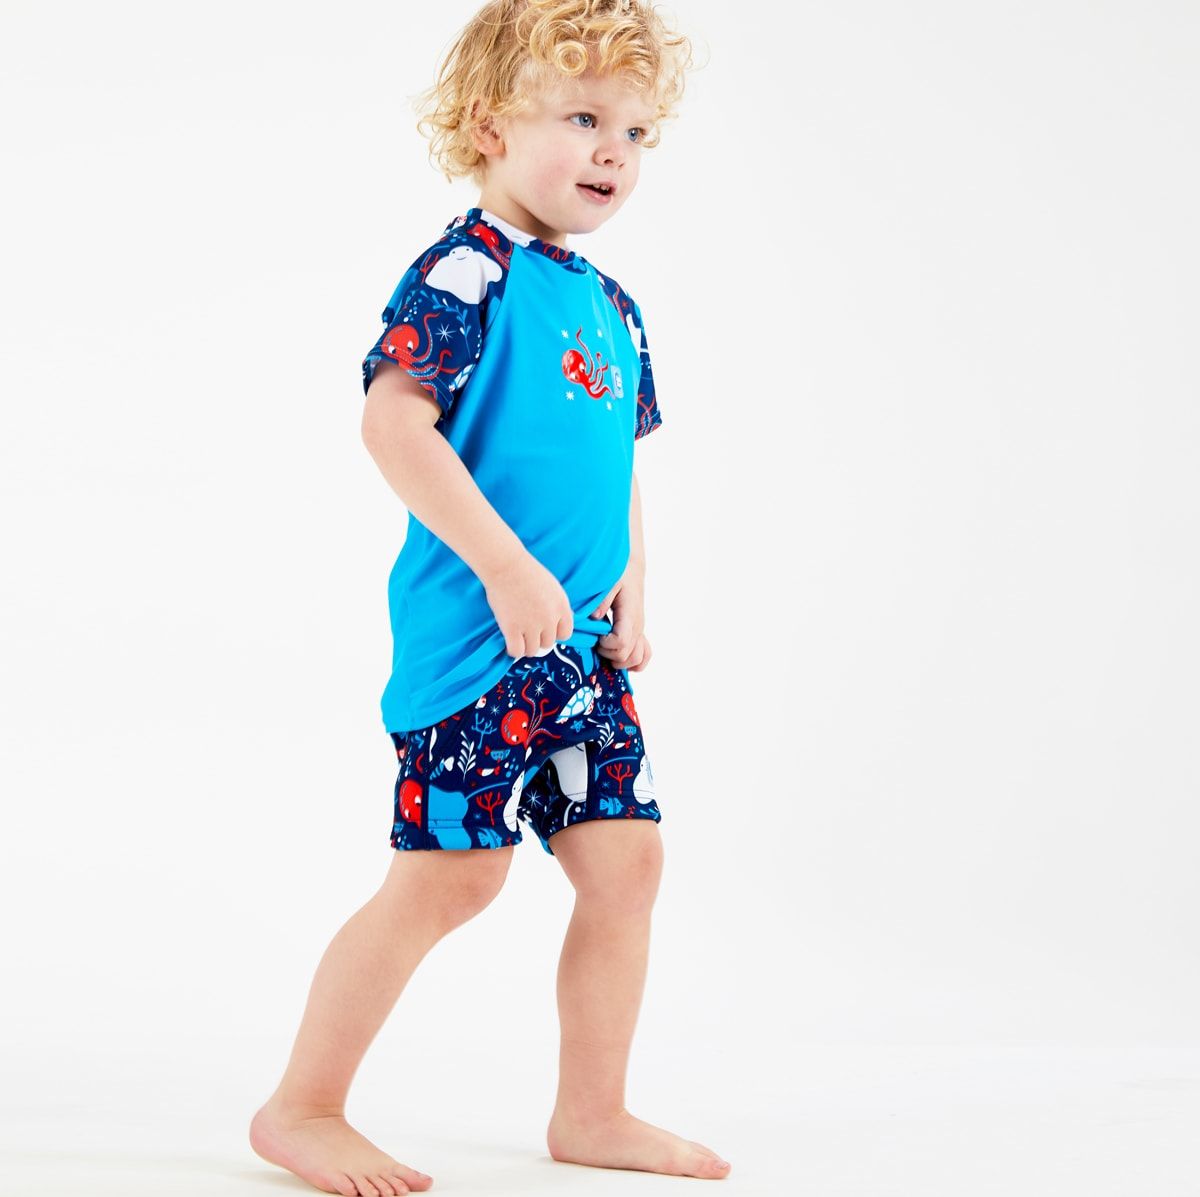 Lifestyle image of toddler wearing UV protective short sleeve rash top in blue, and under the sea themed print on the chest and sleeves. He's also wearing matching jammers or swim shorts.